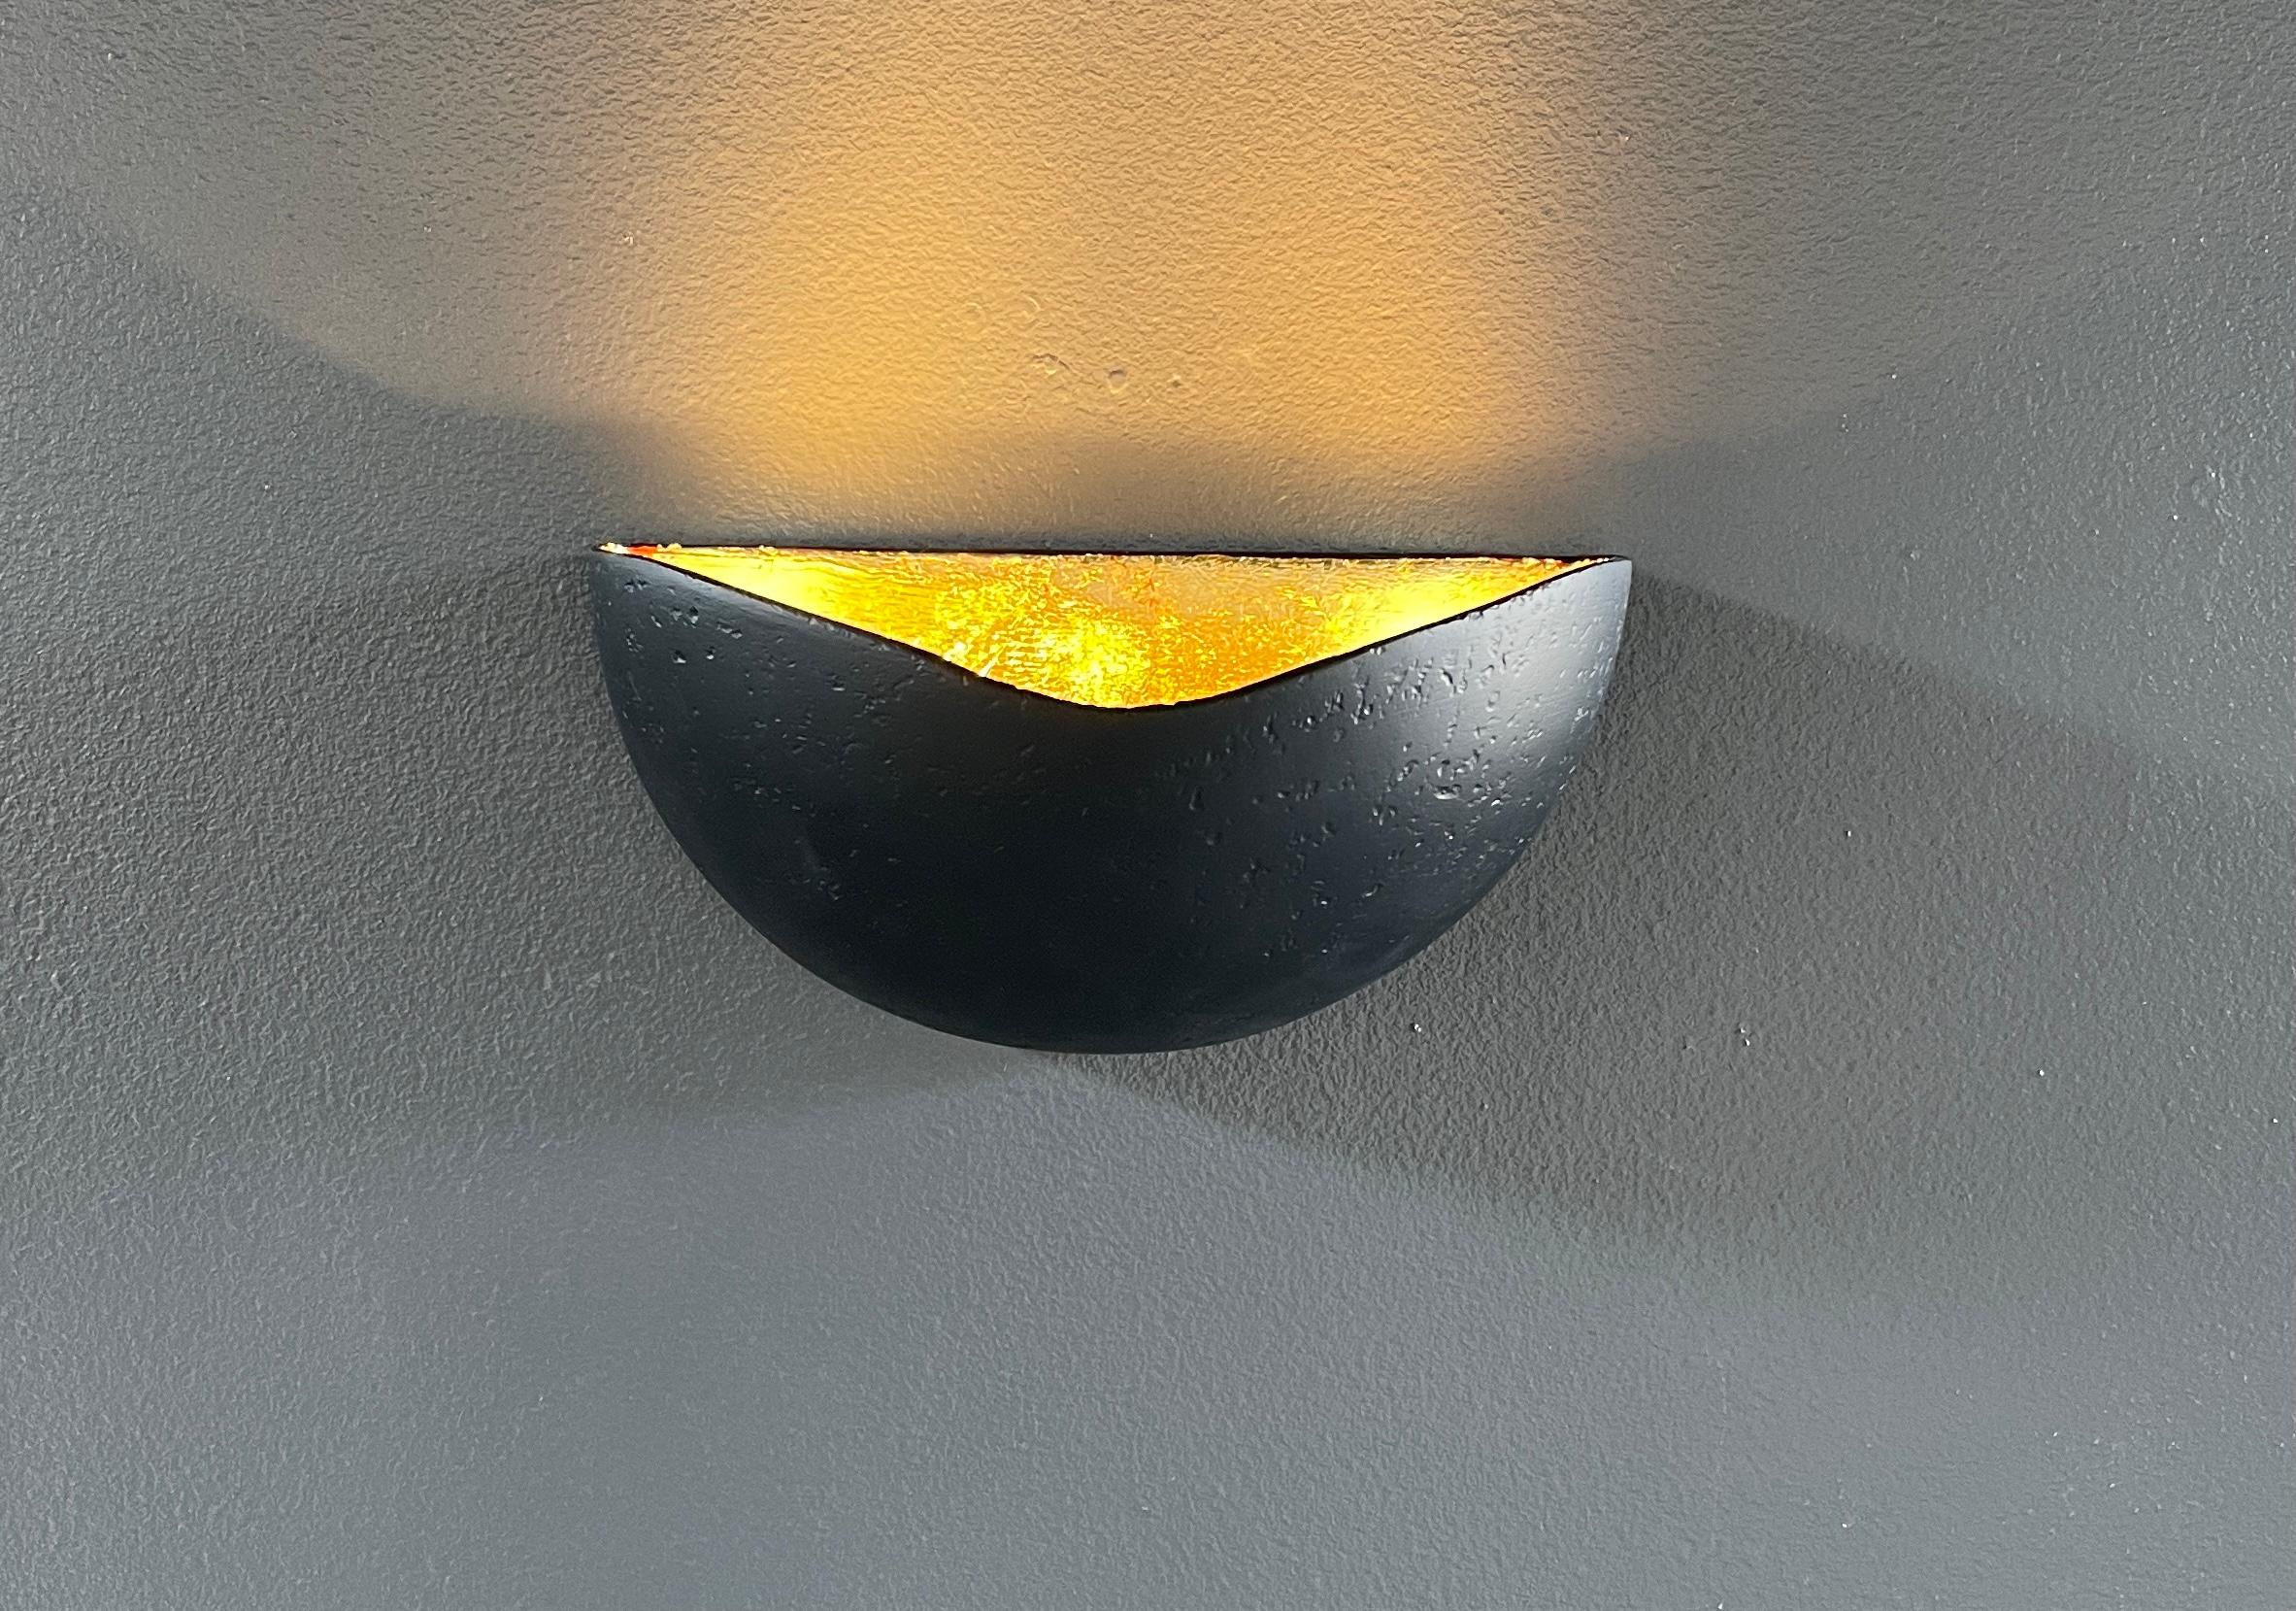 Stainless Steel St Germain Sconce, Matte Black with Gold Leaf, by Bourgeois Boheme Atelier